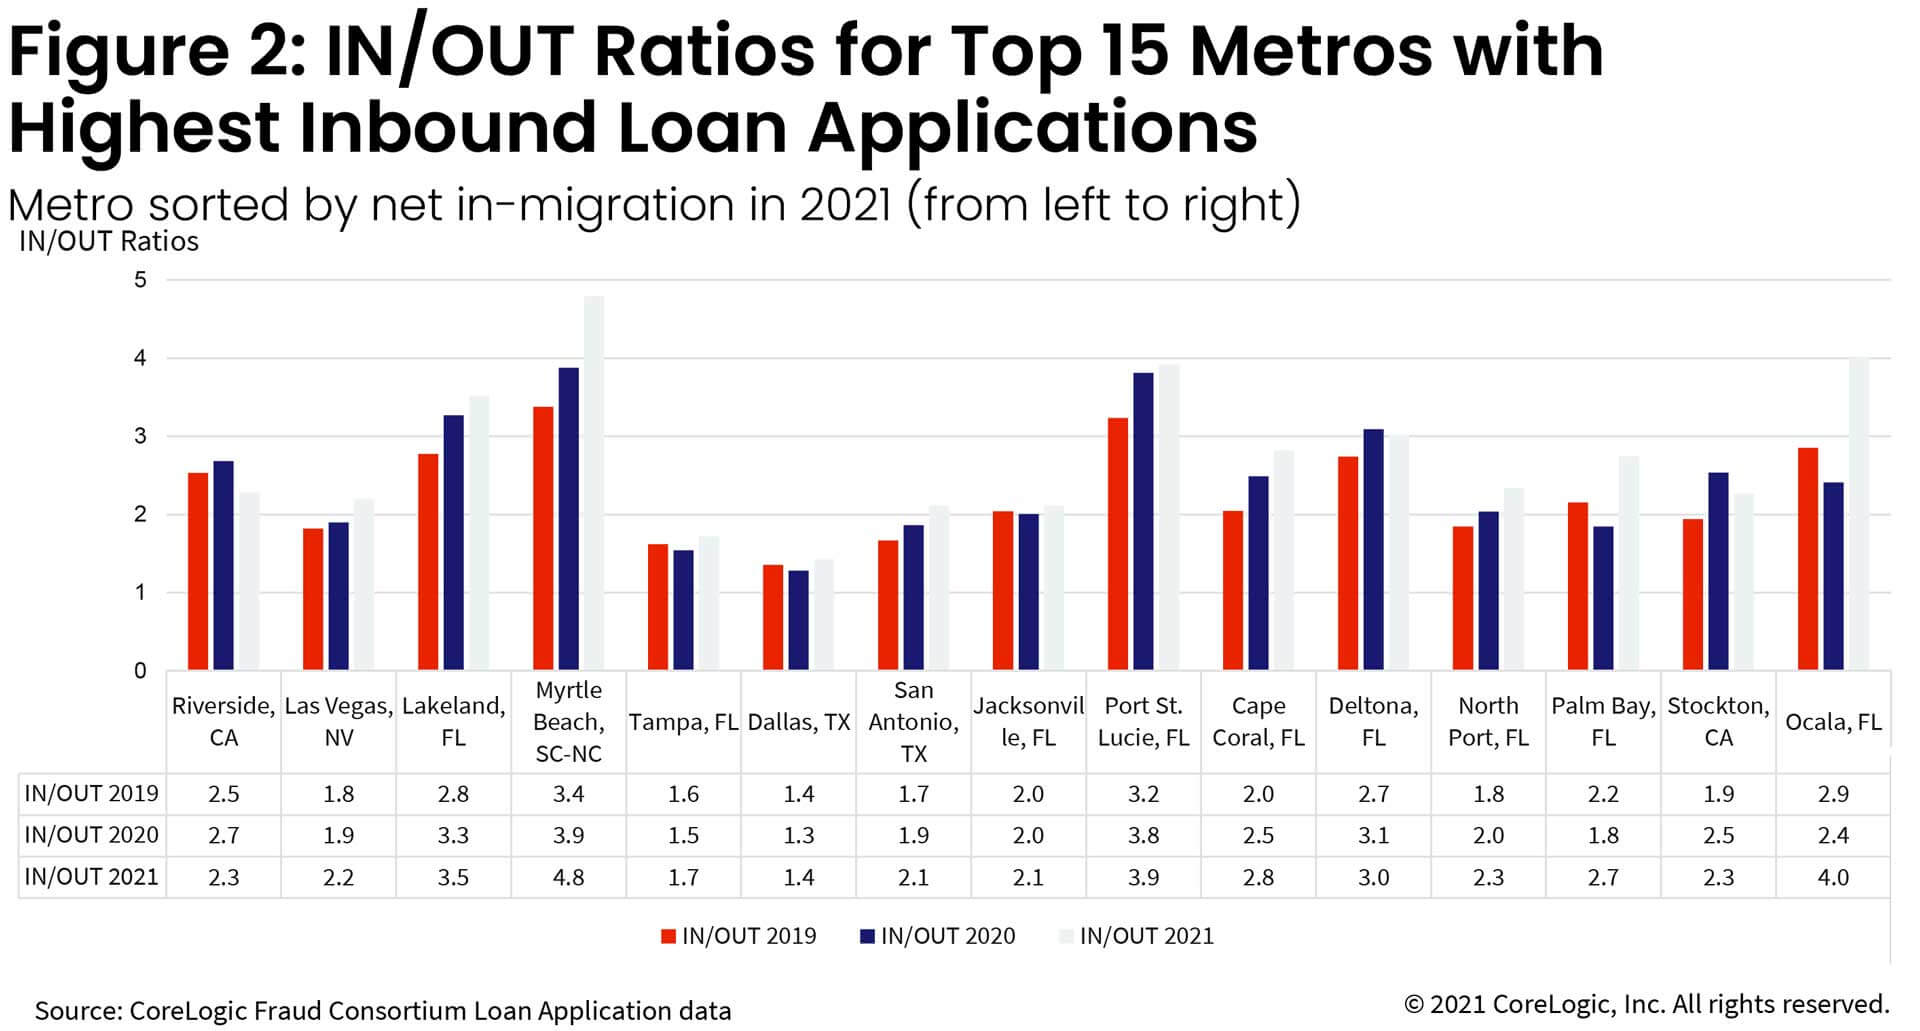 Figure 2. IN/OUT Ratios for Top 15 Metros with Highest Inbound Loan Applications 